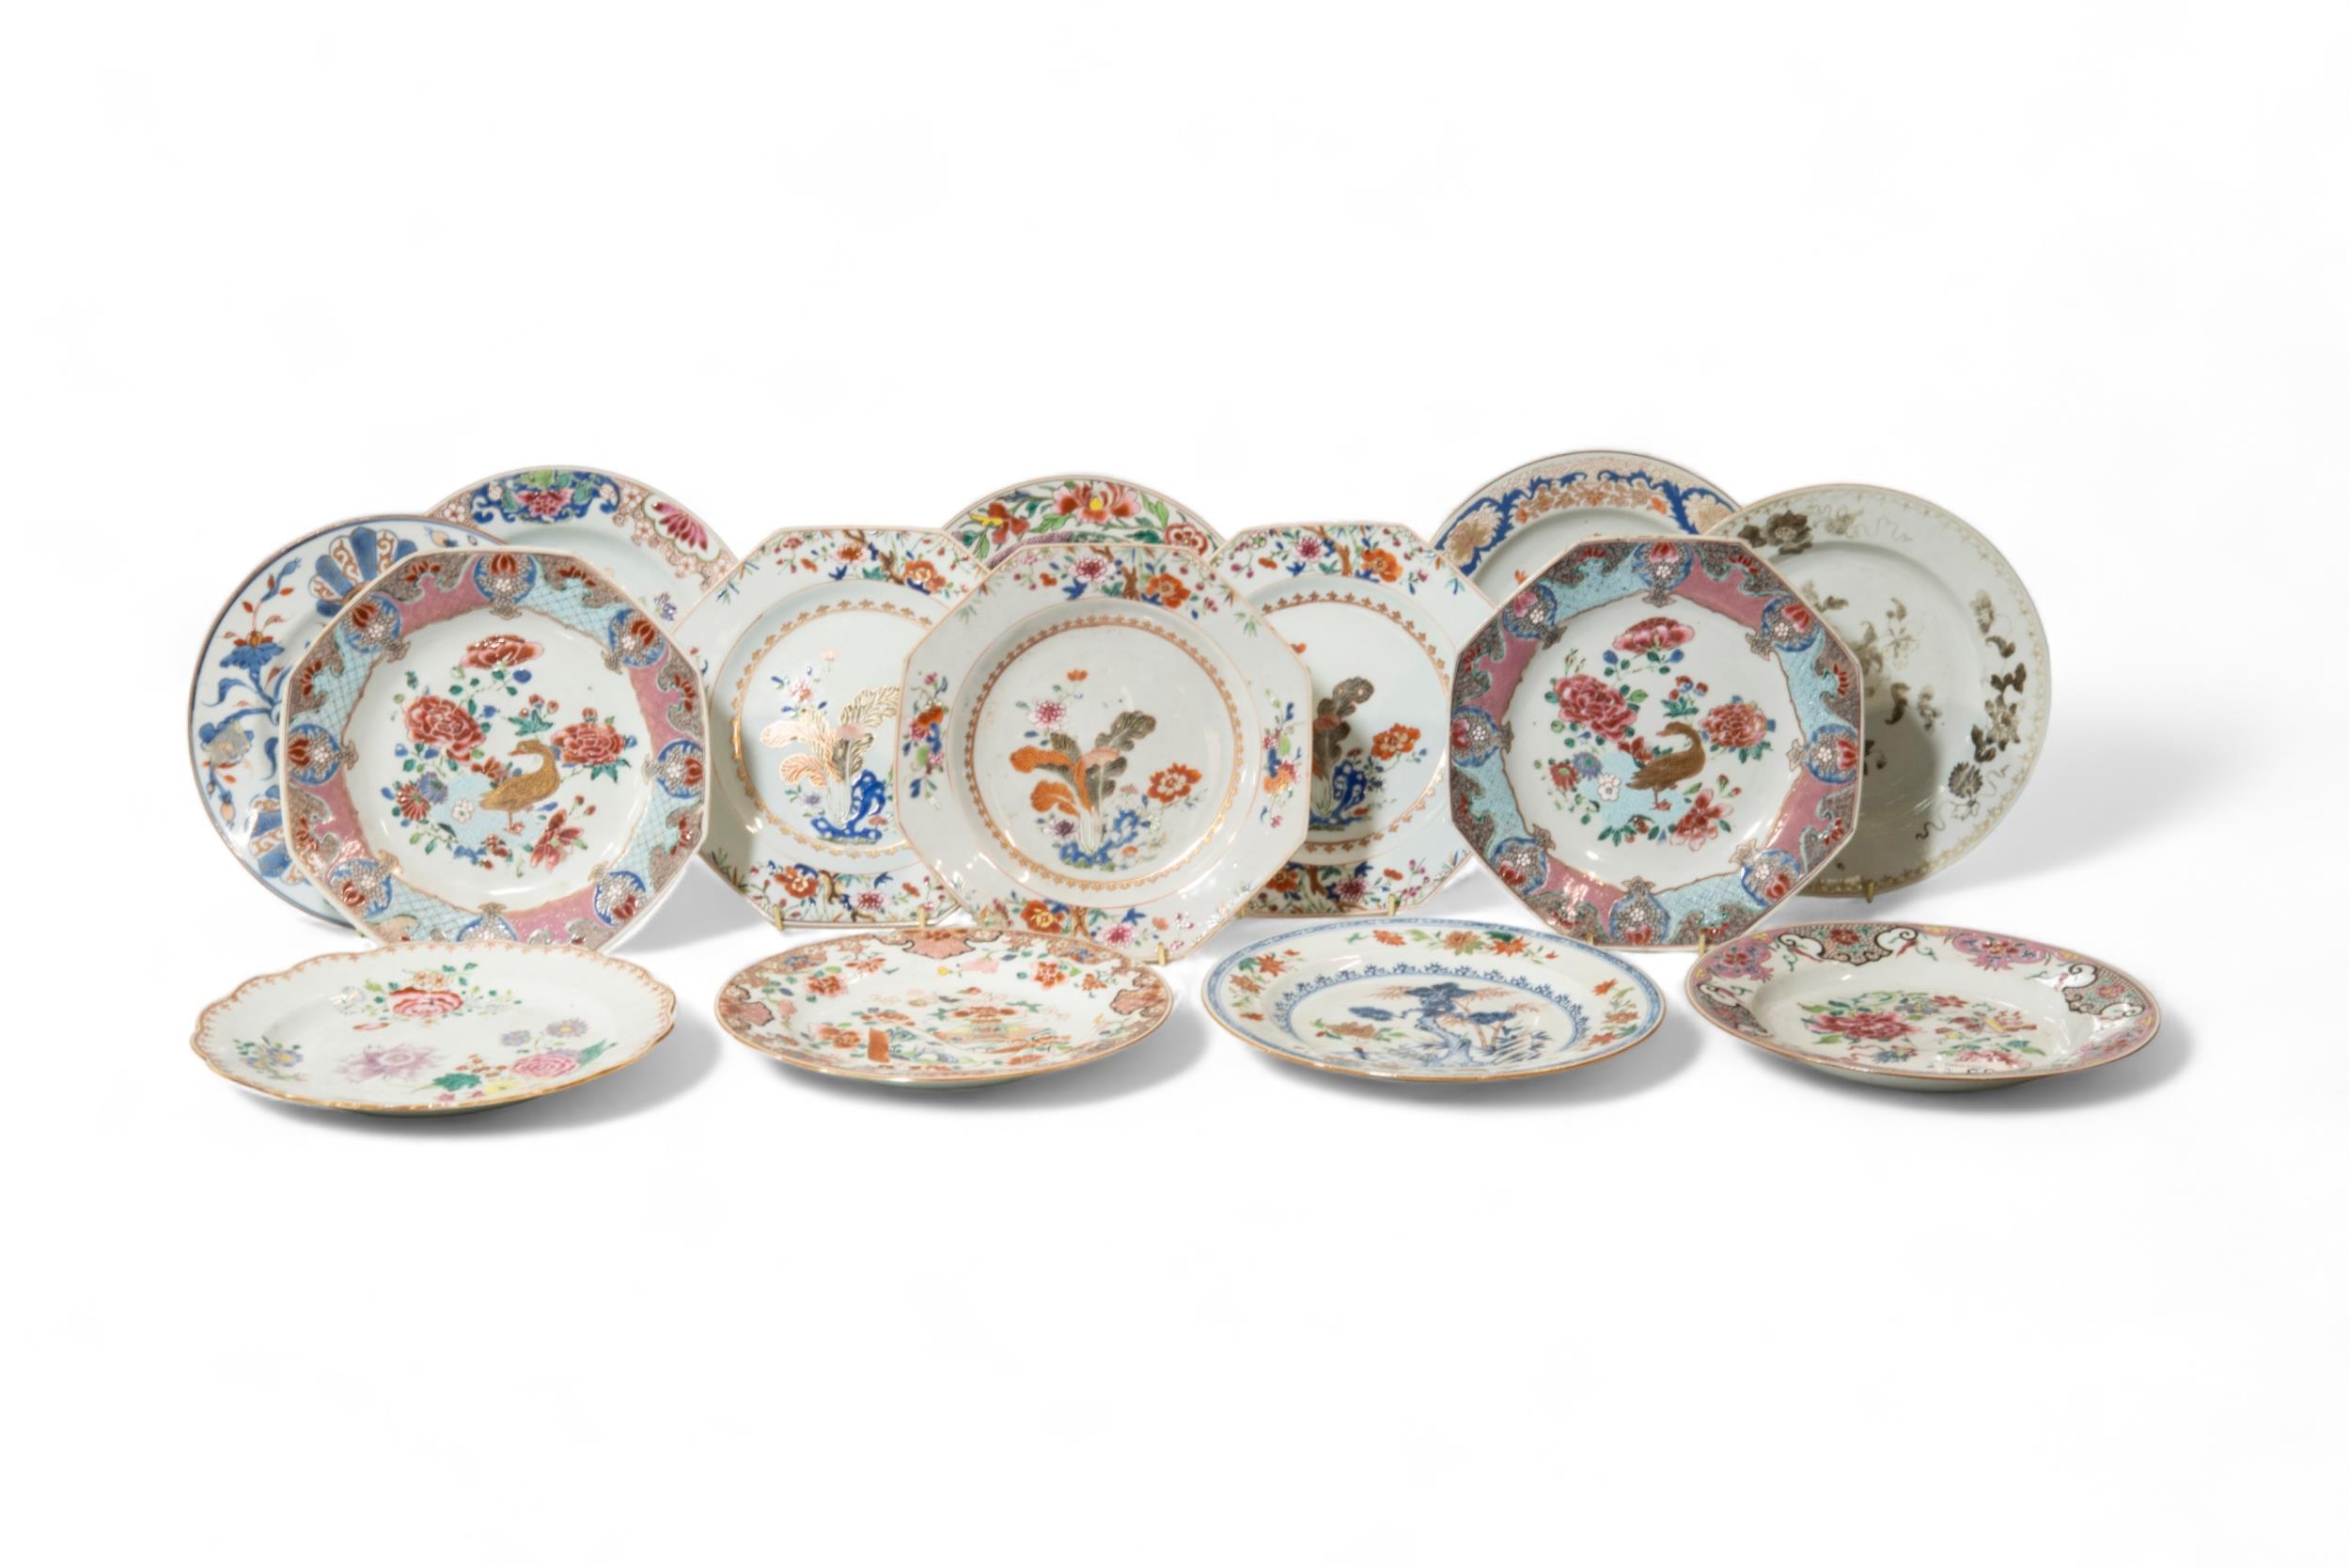 A GROUP OF FOURTEEN CHINESE EXPORT DISHES QING DYNASTY, 18TH CENTURY 22cm - 23cm diam approx